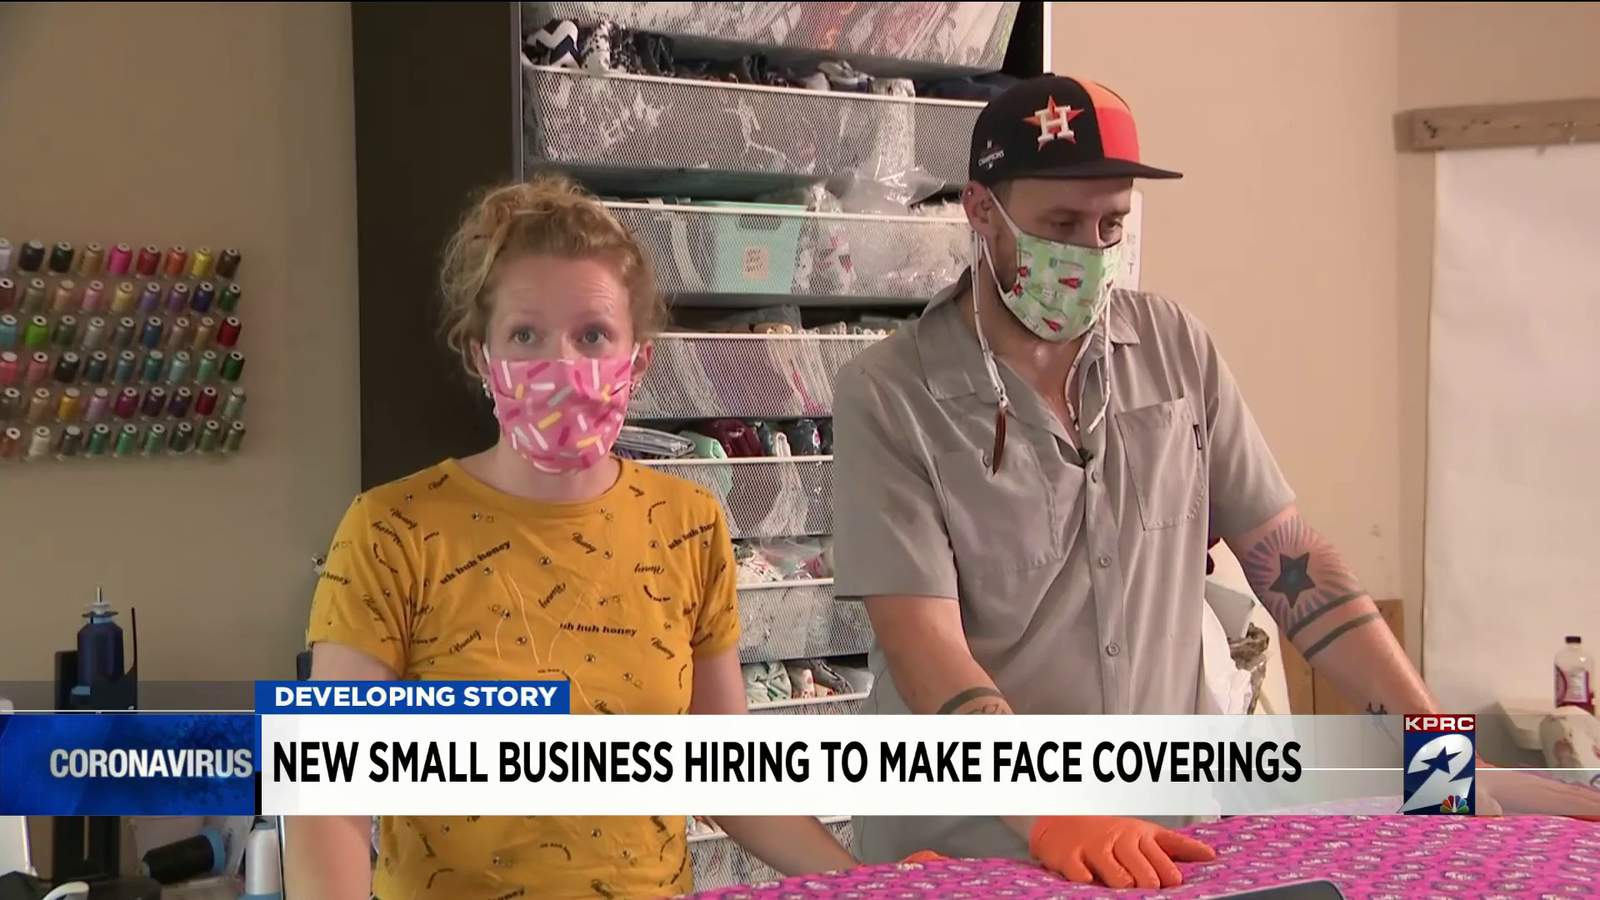 Sienna couple creates small business to make face masks while out of work